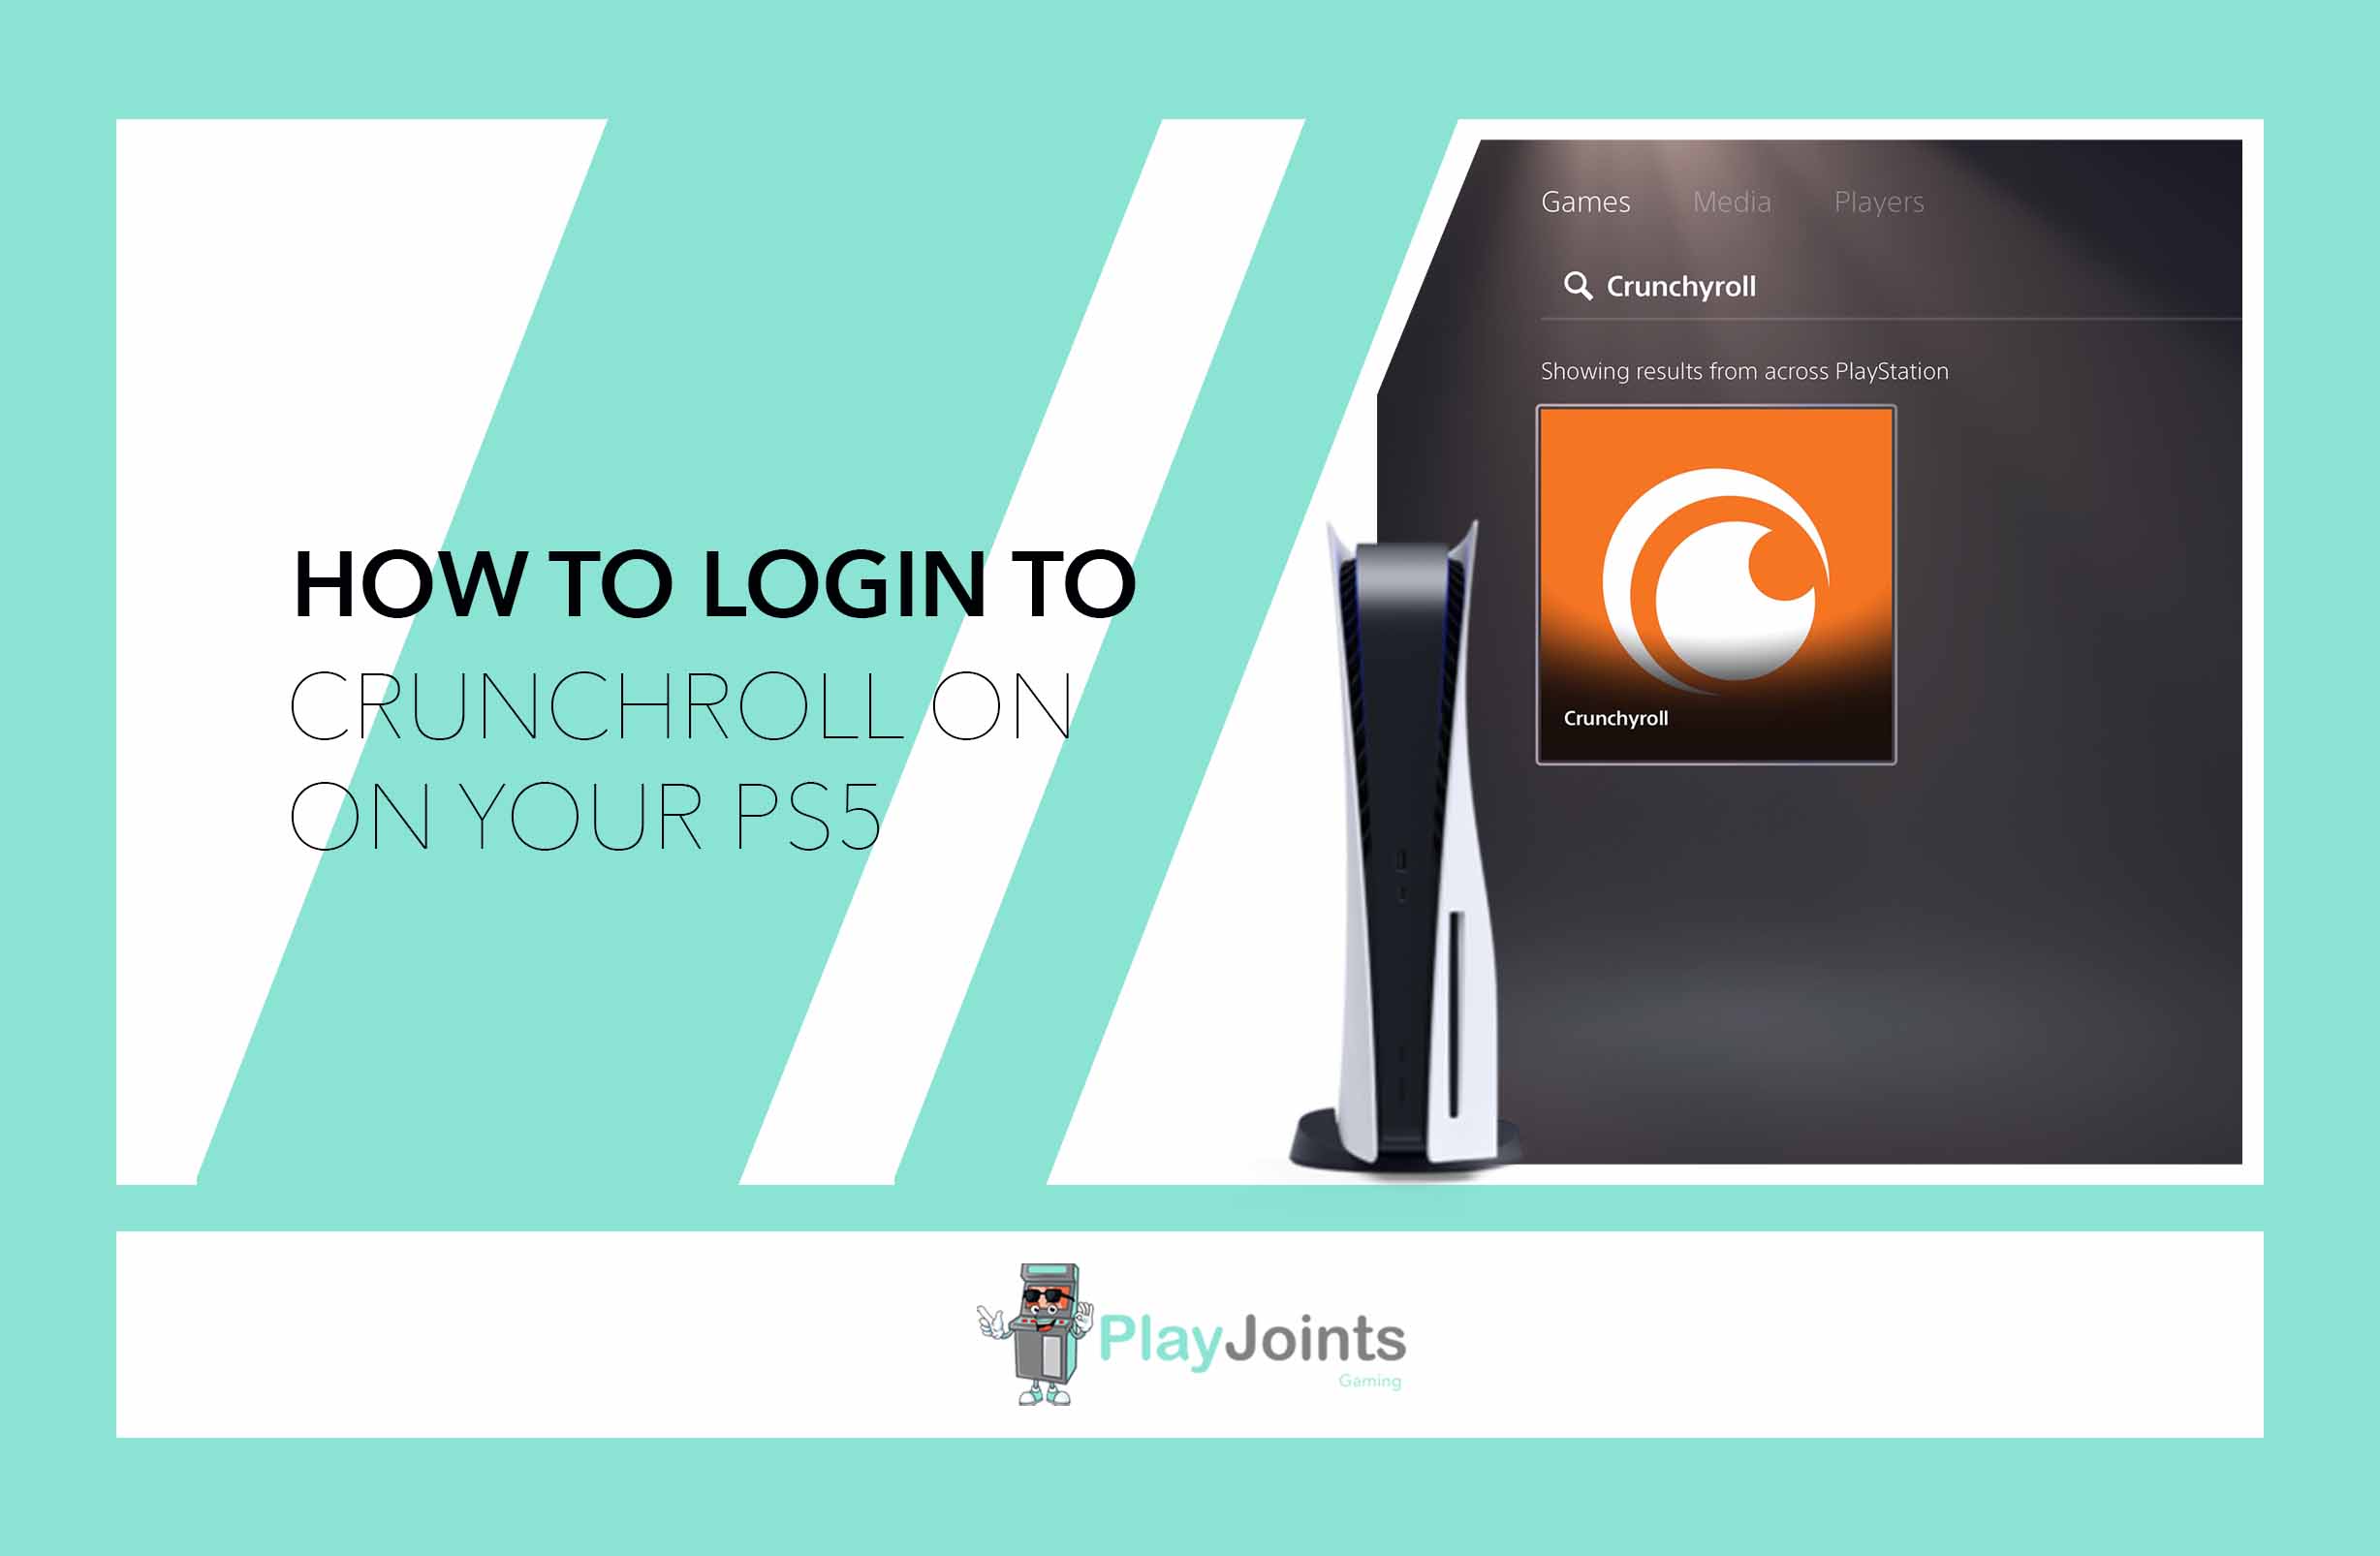 How to Login to Crunchyroll on Your PS5